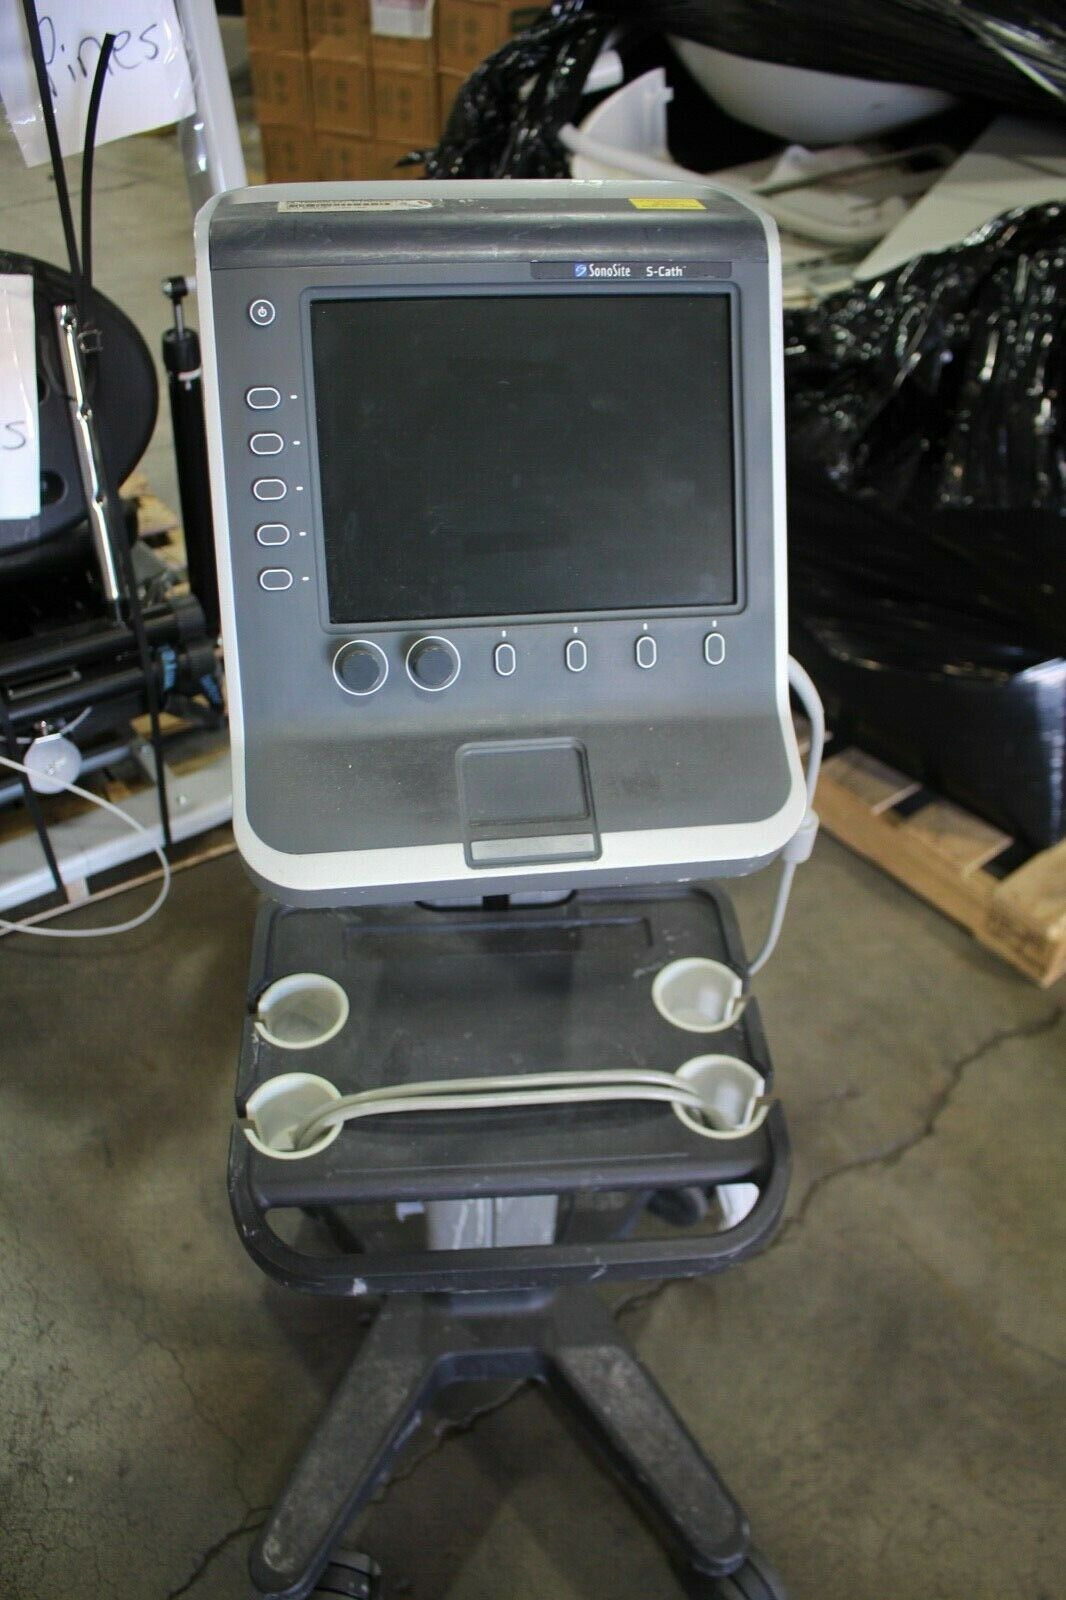 SonoSite   S-Cath Ultrasound System WITH CART DIAGNOSTIC ULTRASOUND MACHINES FOR SALE